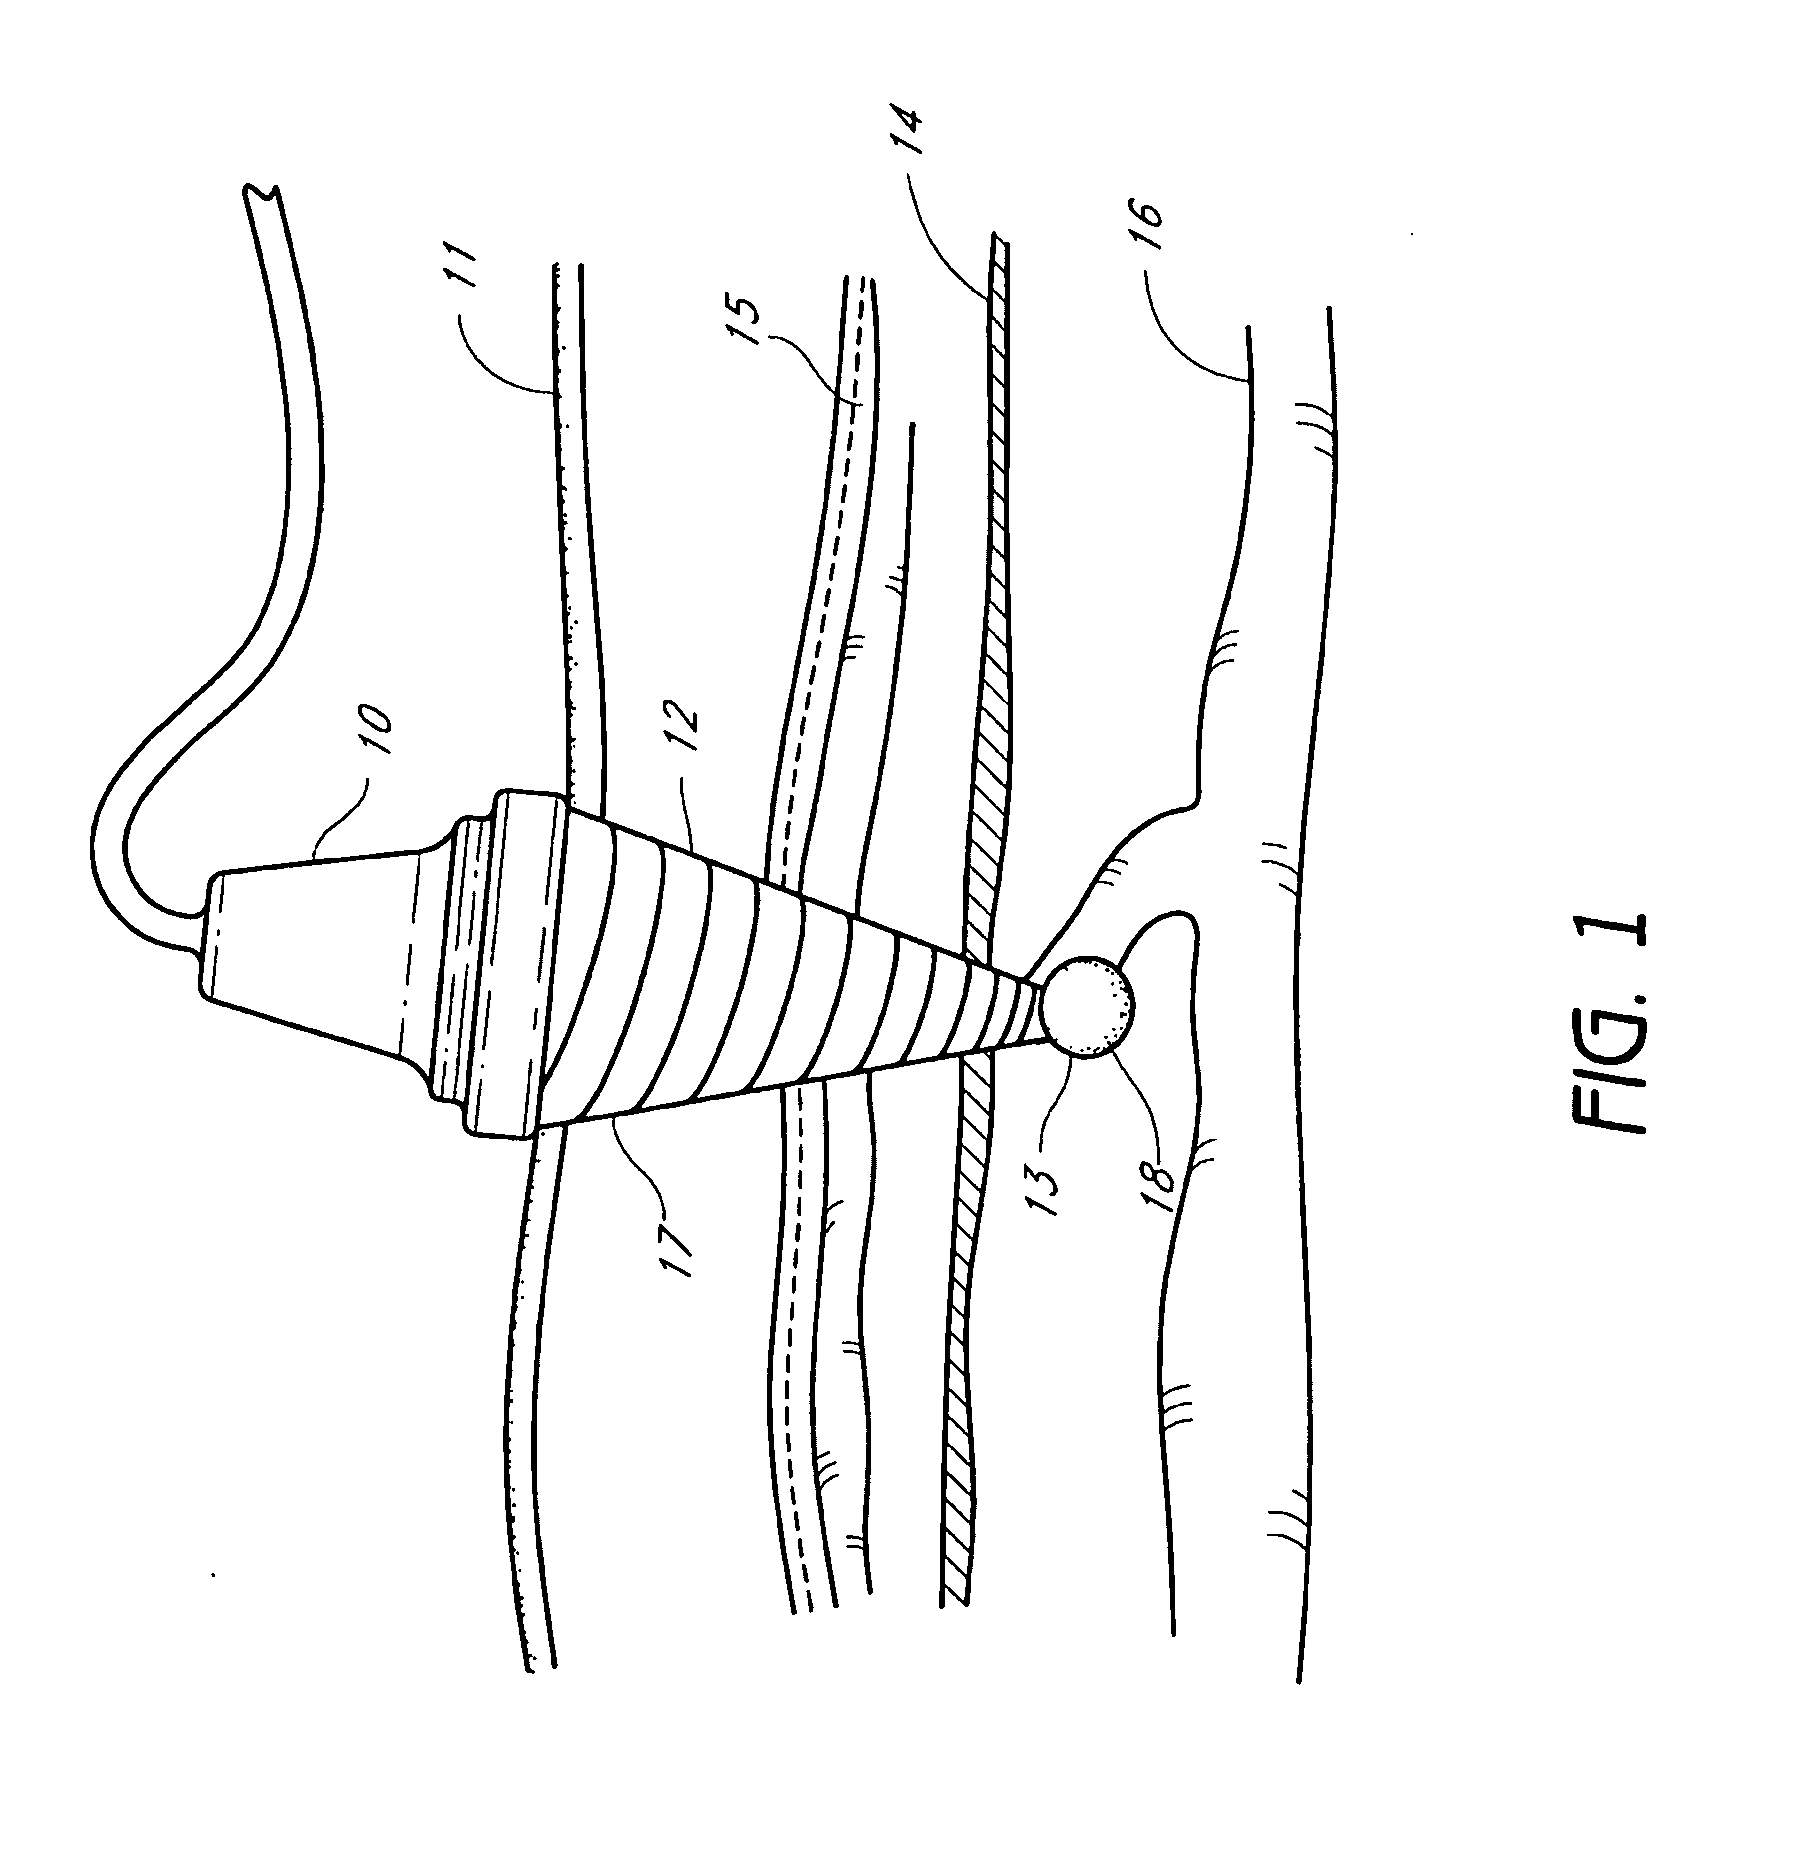 Method and apparatus for varicose vein treatment using acoustic hemostasis